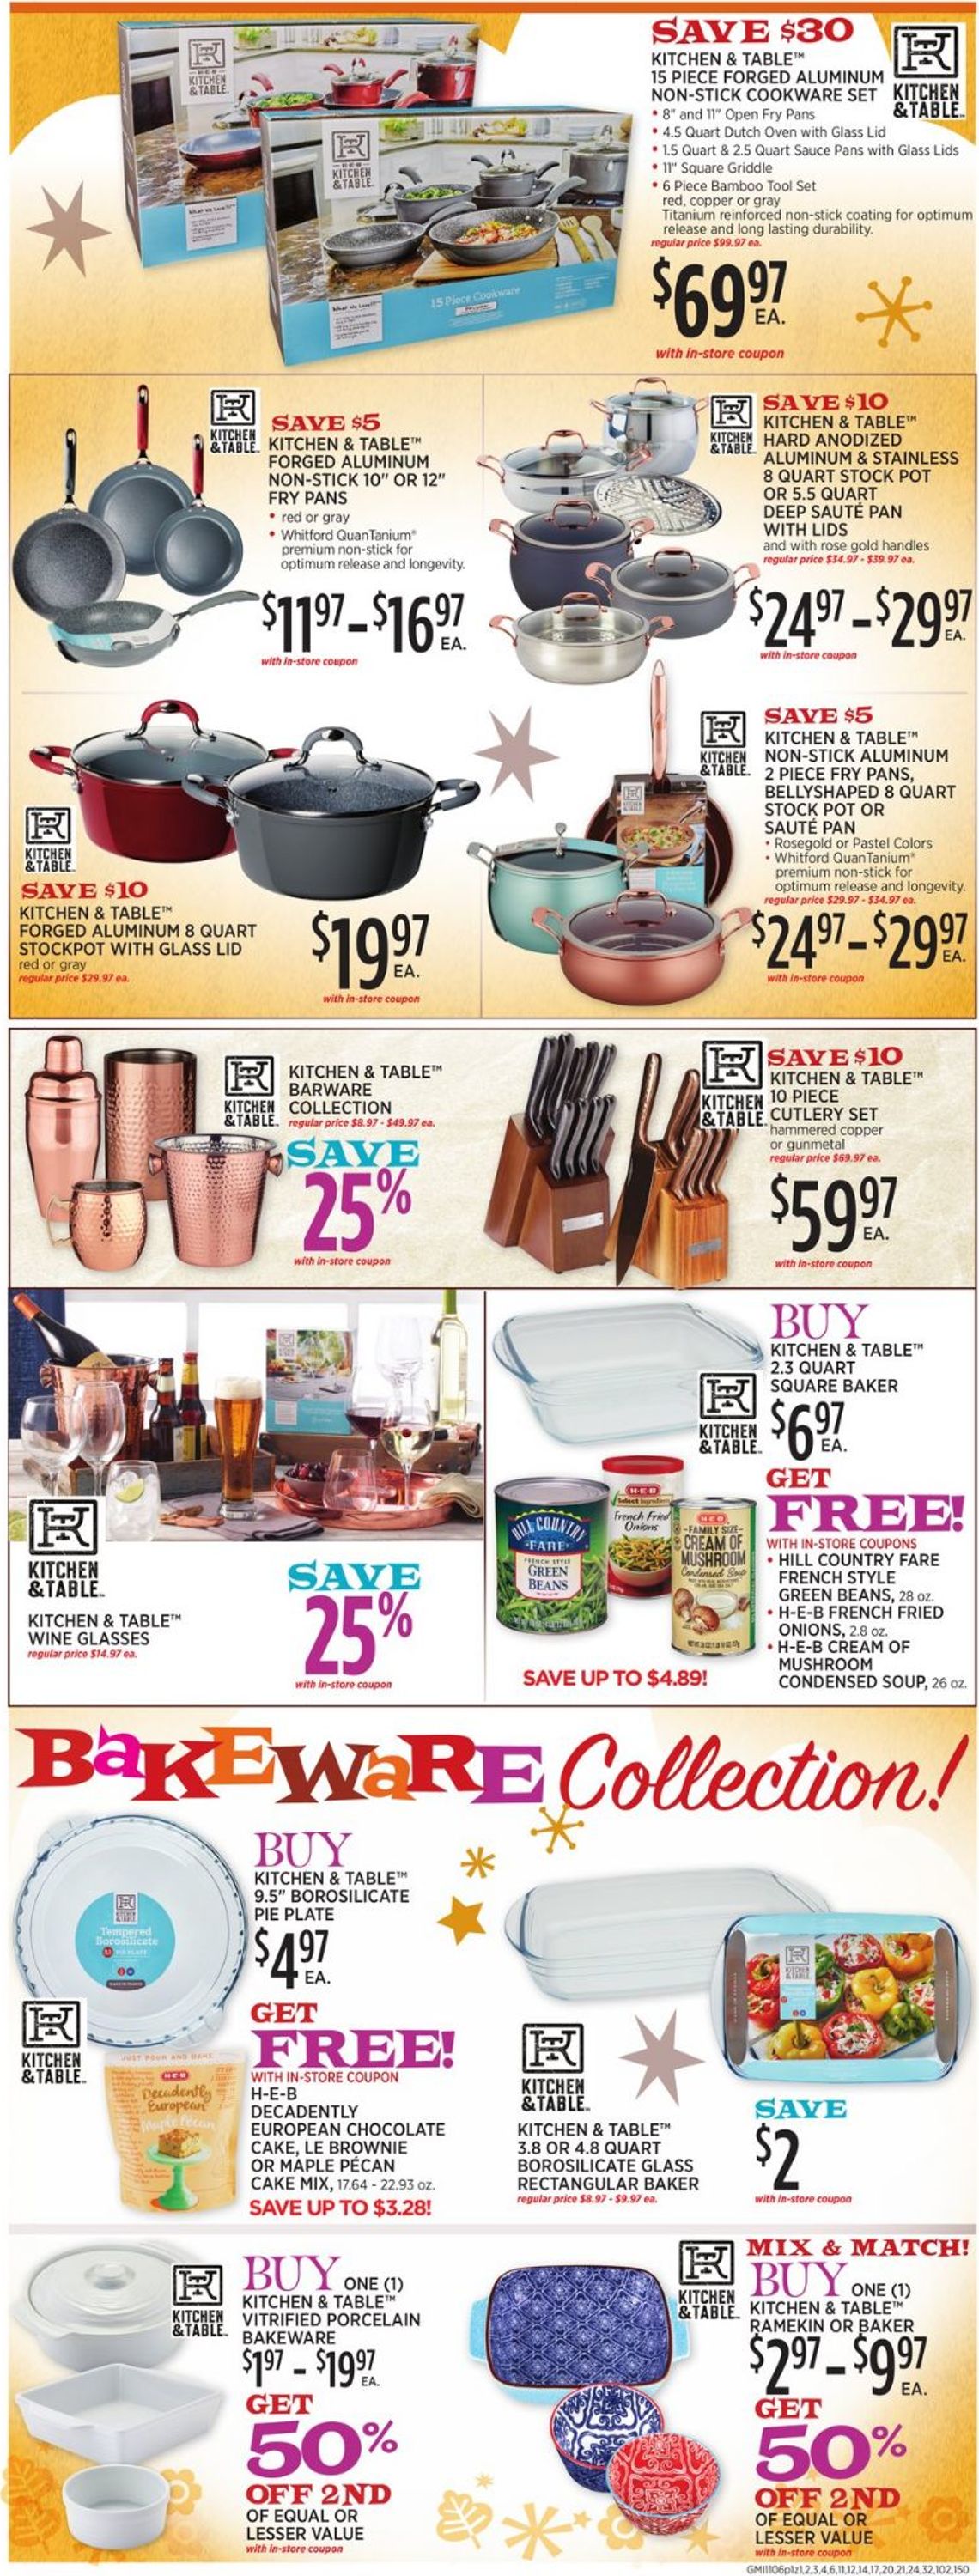 H-E-B Ad from 11/06/2019